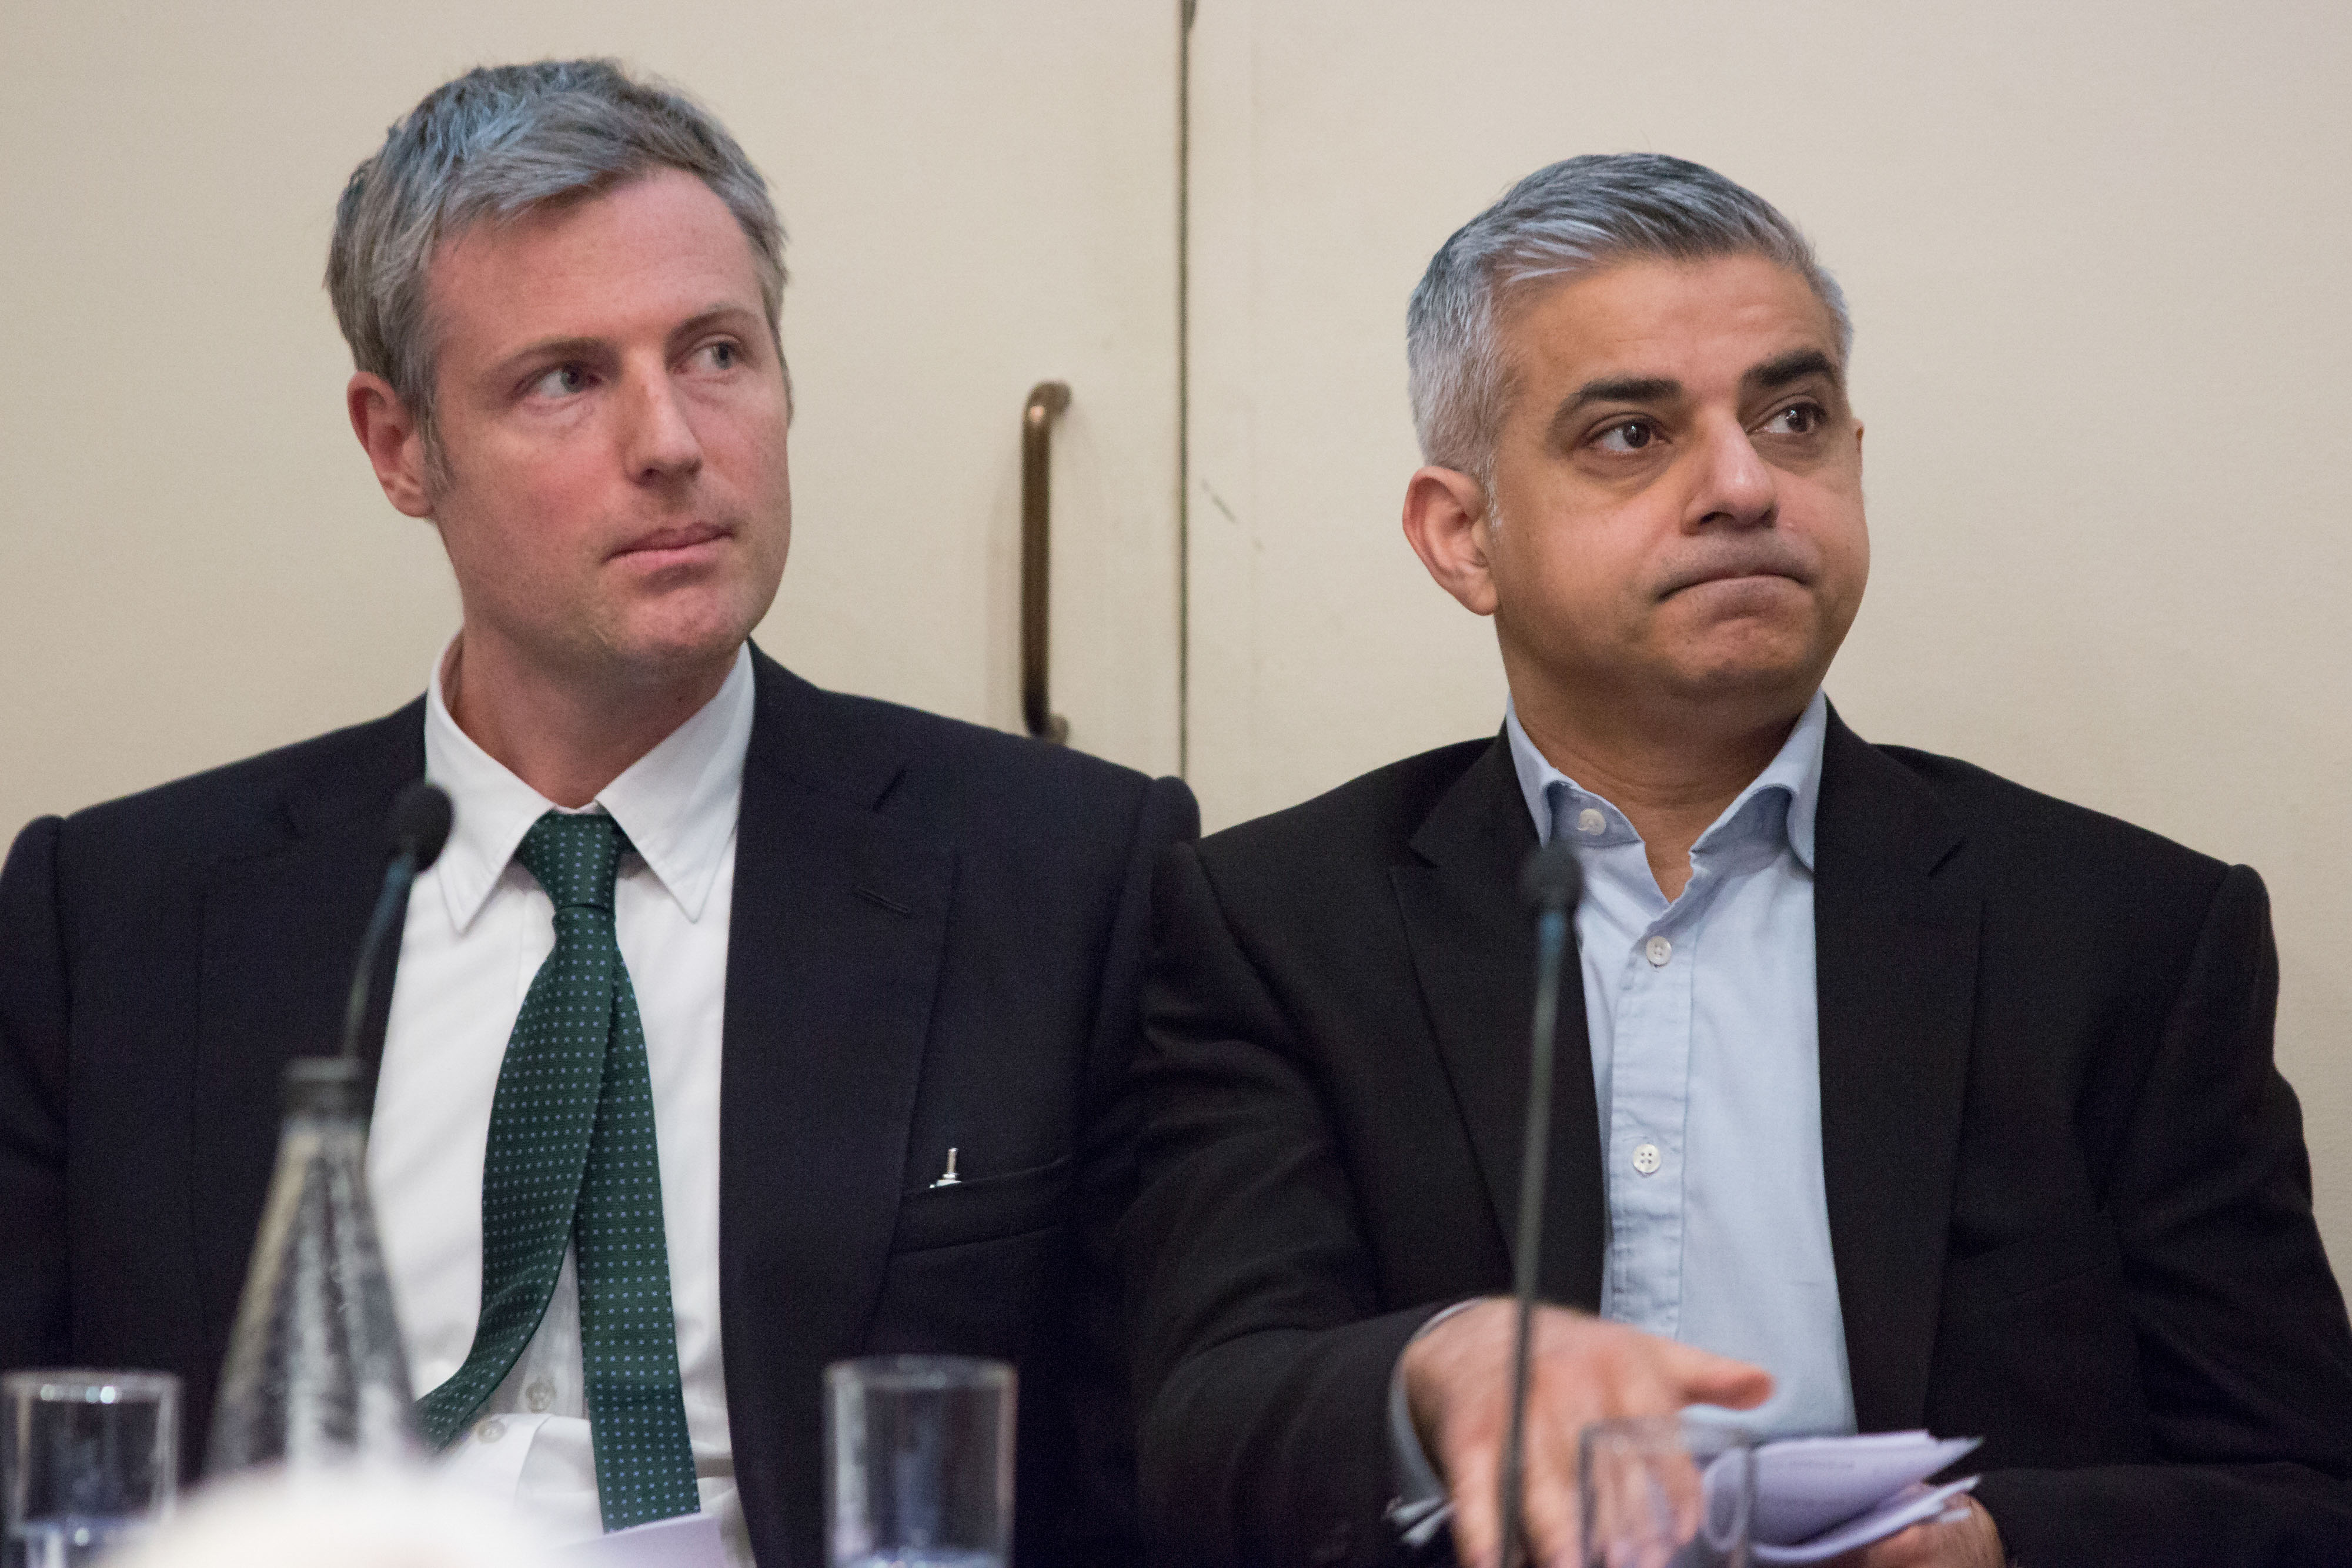 Zac Goldsmith, U.K. ruling Conservative Party candidate for the role of London Mayor, left and Sadiq Kahn, U.K. opposition Labour Party candidate for the role of London Mayor, attend the launch of the London Housing Commission Report at the Geological Society in London, U.K., on Monday, March 7, 2016. (Jason Alden&mdash;Bloomberg/Getty Images)